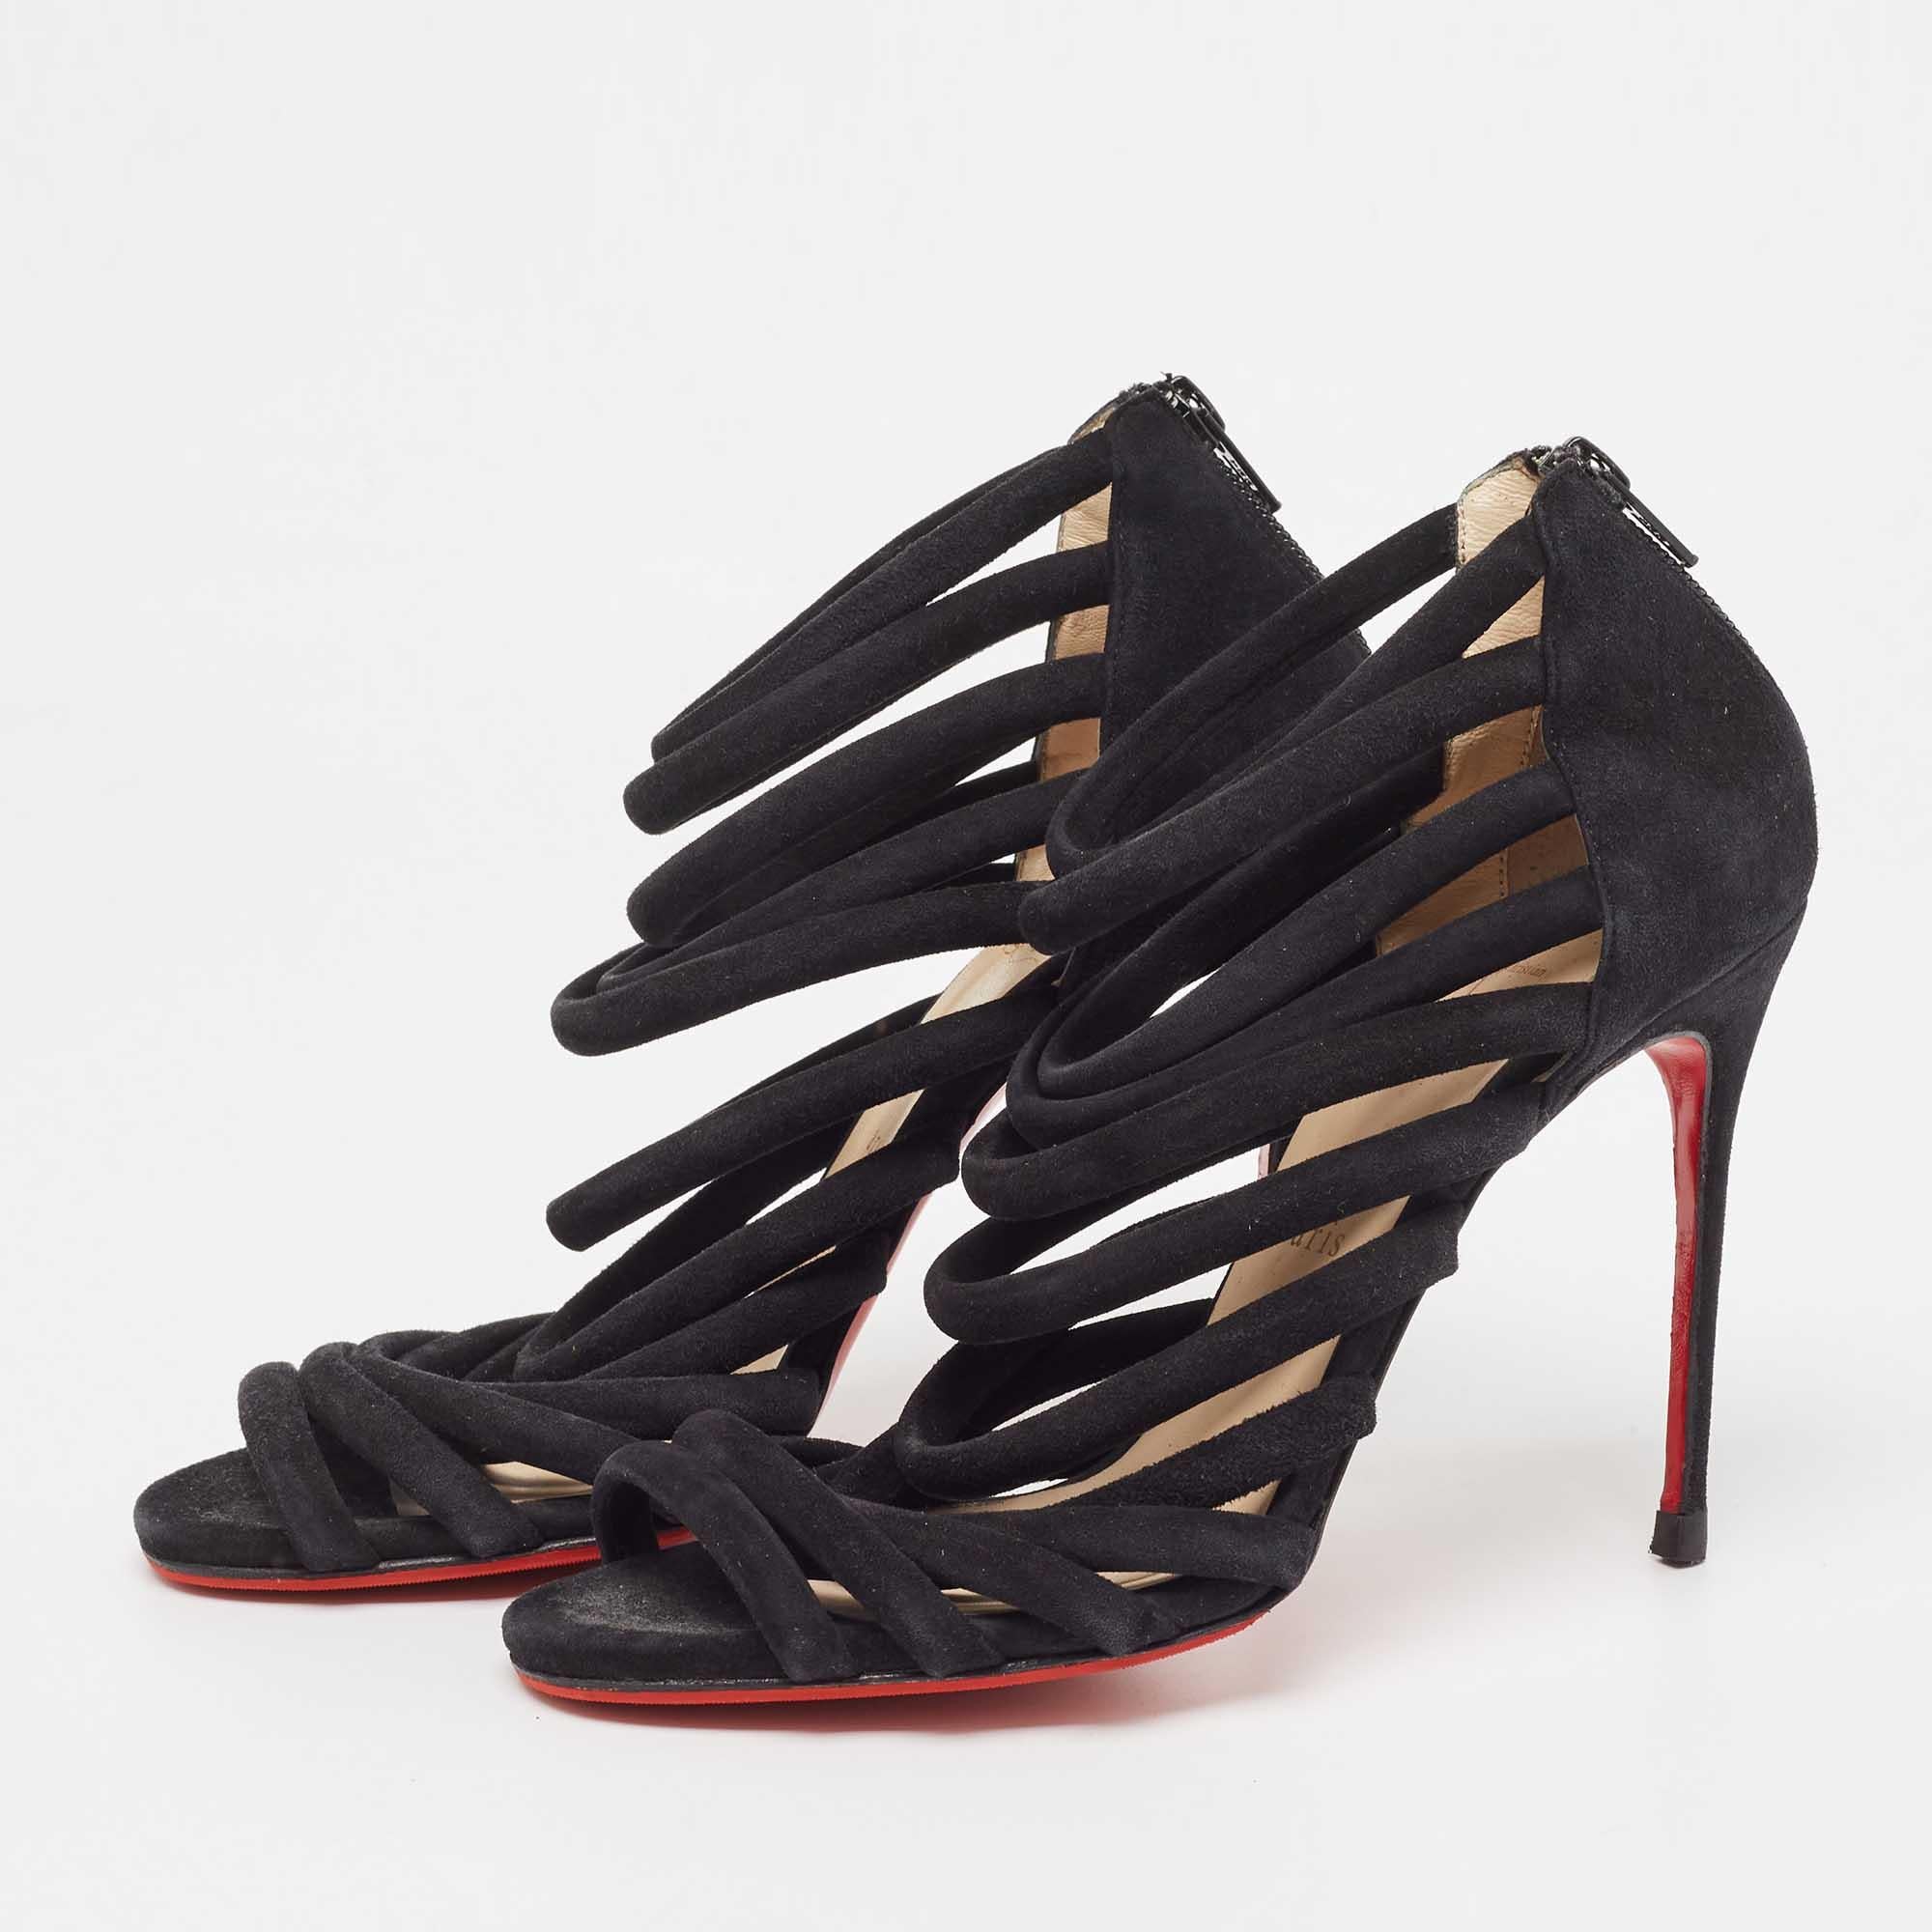 Christian Louboutin Black Suede Strappy Sandals Size 38.5 For Sale 1